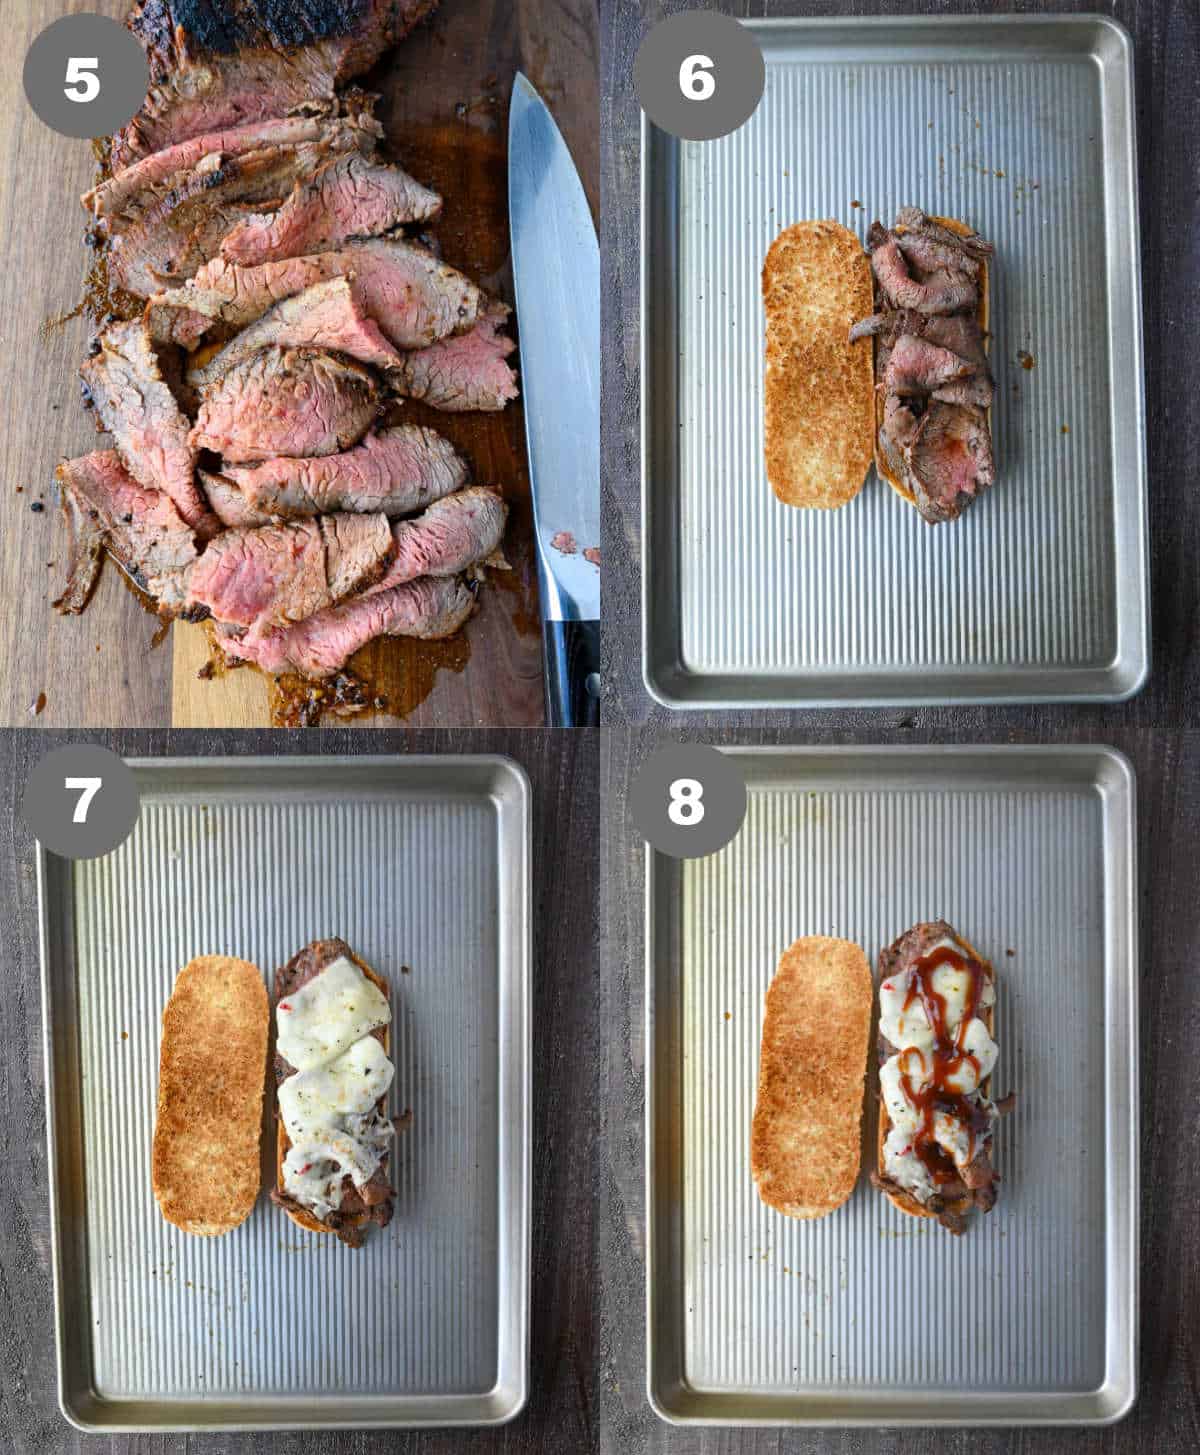 Steps 5 through 8 for making a grilled tri tip sandwich.